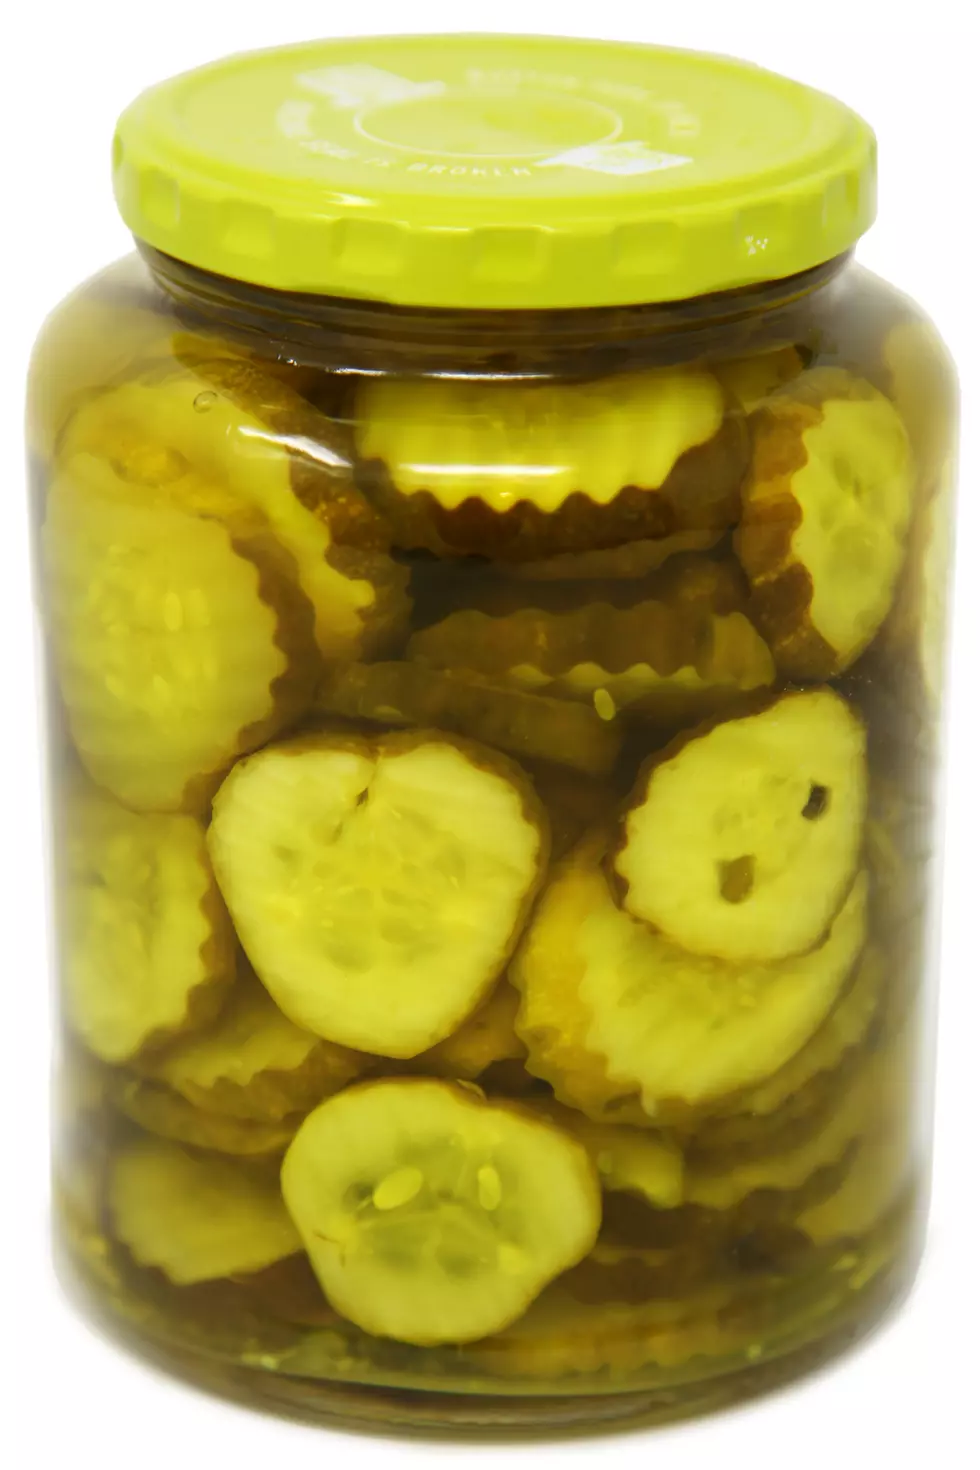 Pickle Lovers Rejoice! 5 Health Reasons To Start Saving Your Pickle Juice